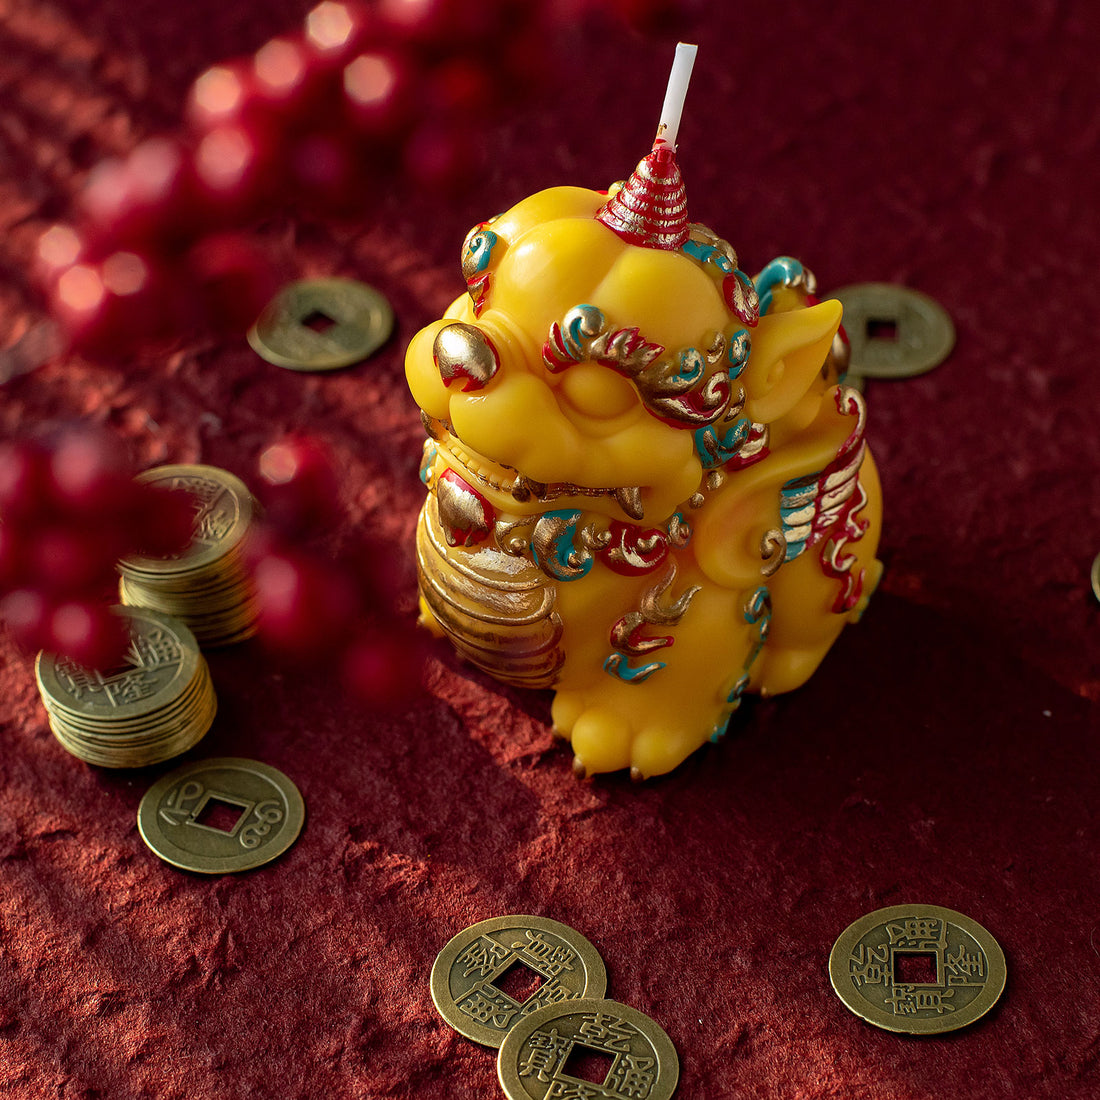 Inspired by the mythical protector Pixiu, this Chinese Fortune Pixiu Charm is a symbol of good luck